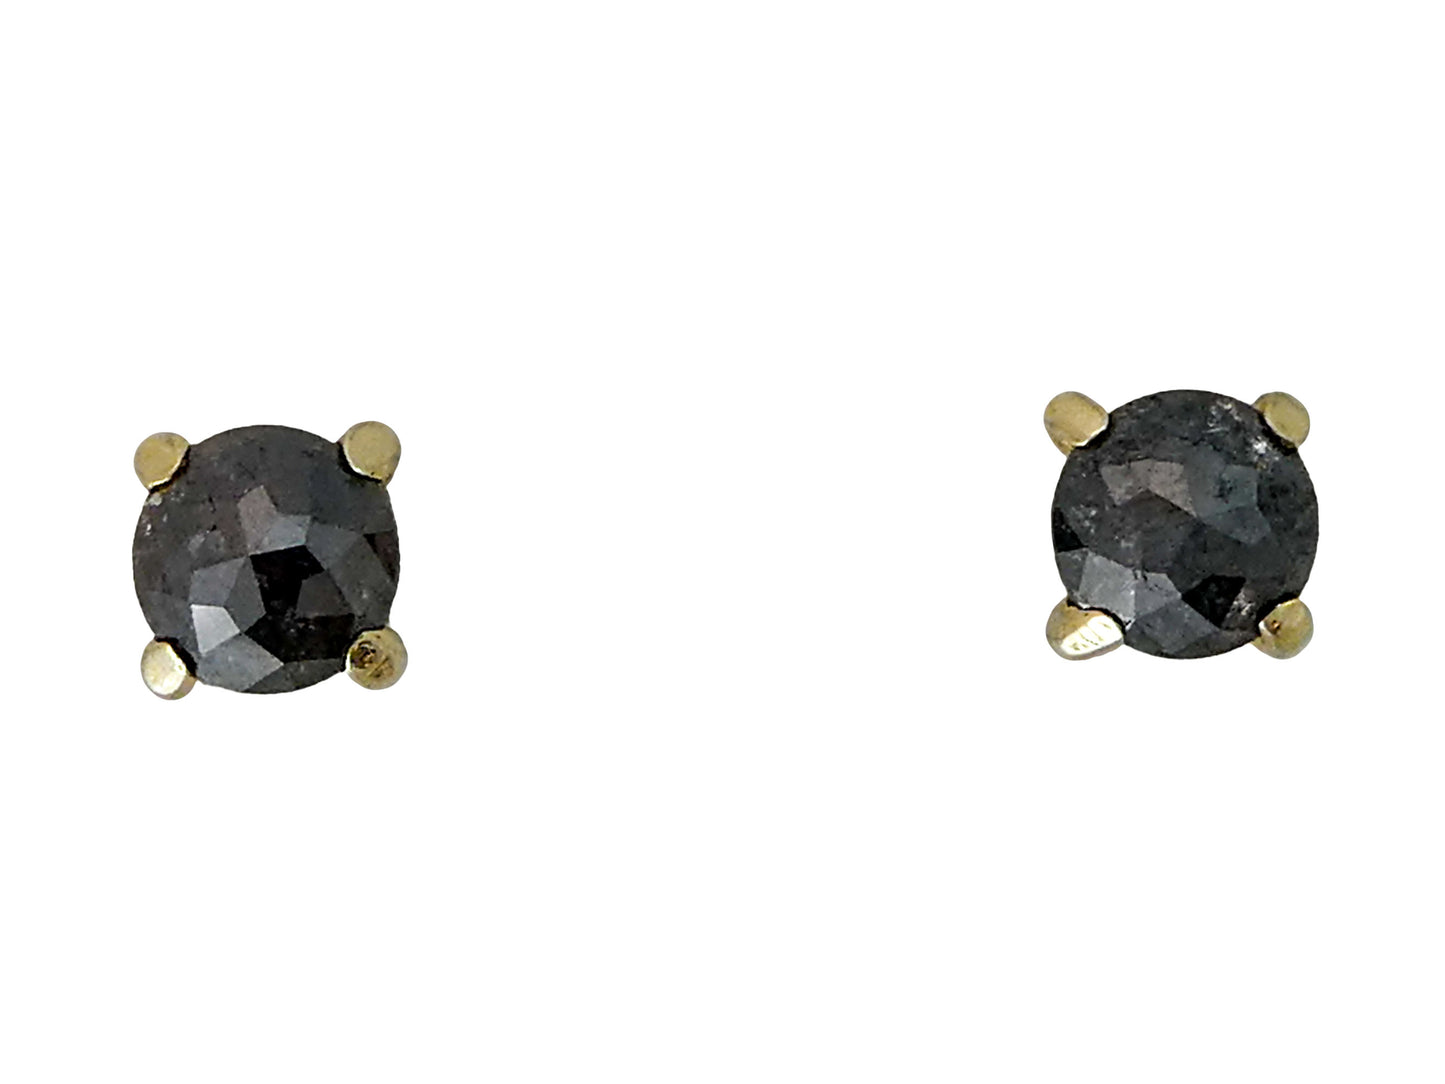 Rose-Cut Black Diamond and 14k Yellow Gold Prong Studs - 4mm rose cut diamond 4-prong stud Earrings | Ready to Ship